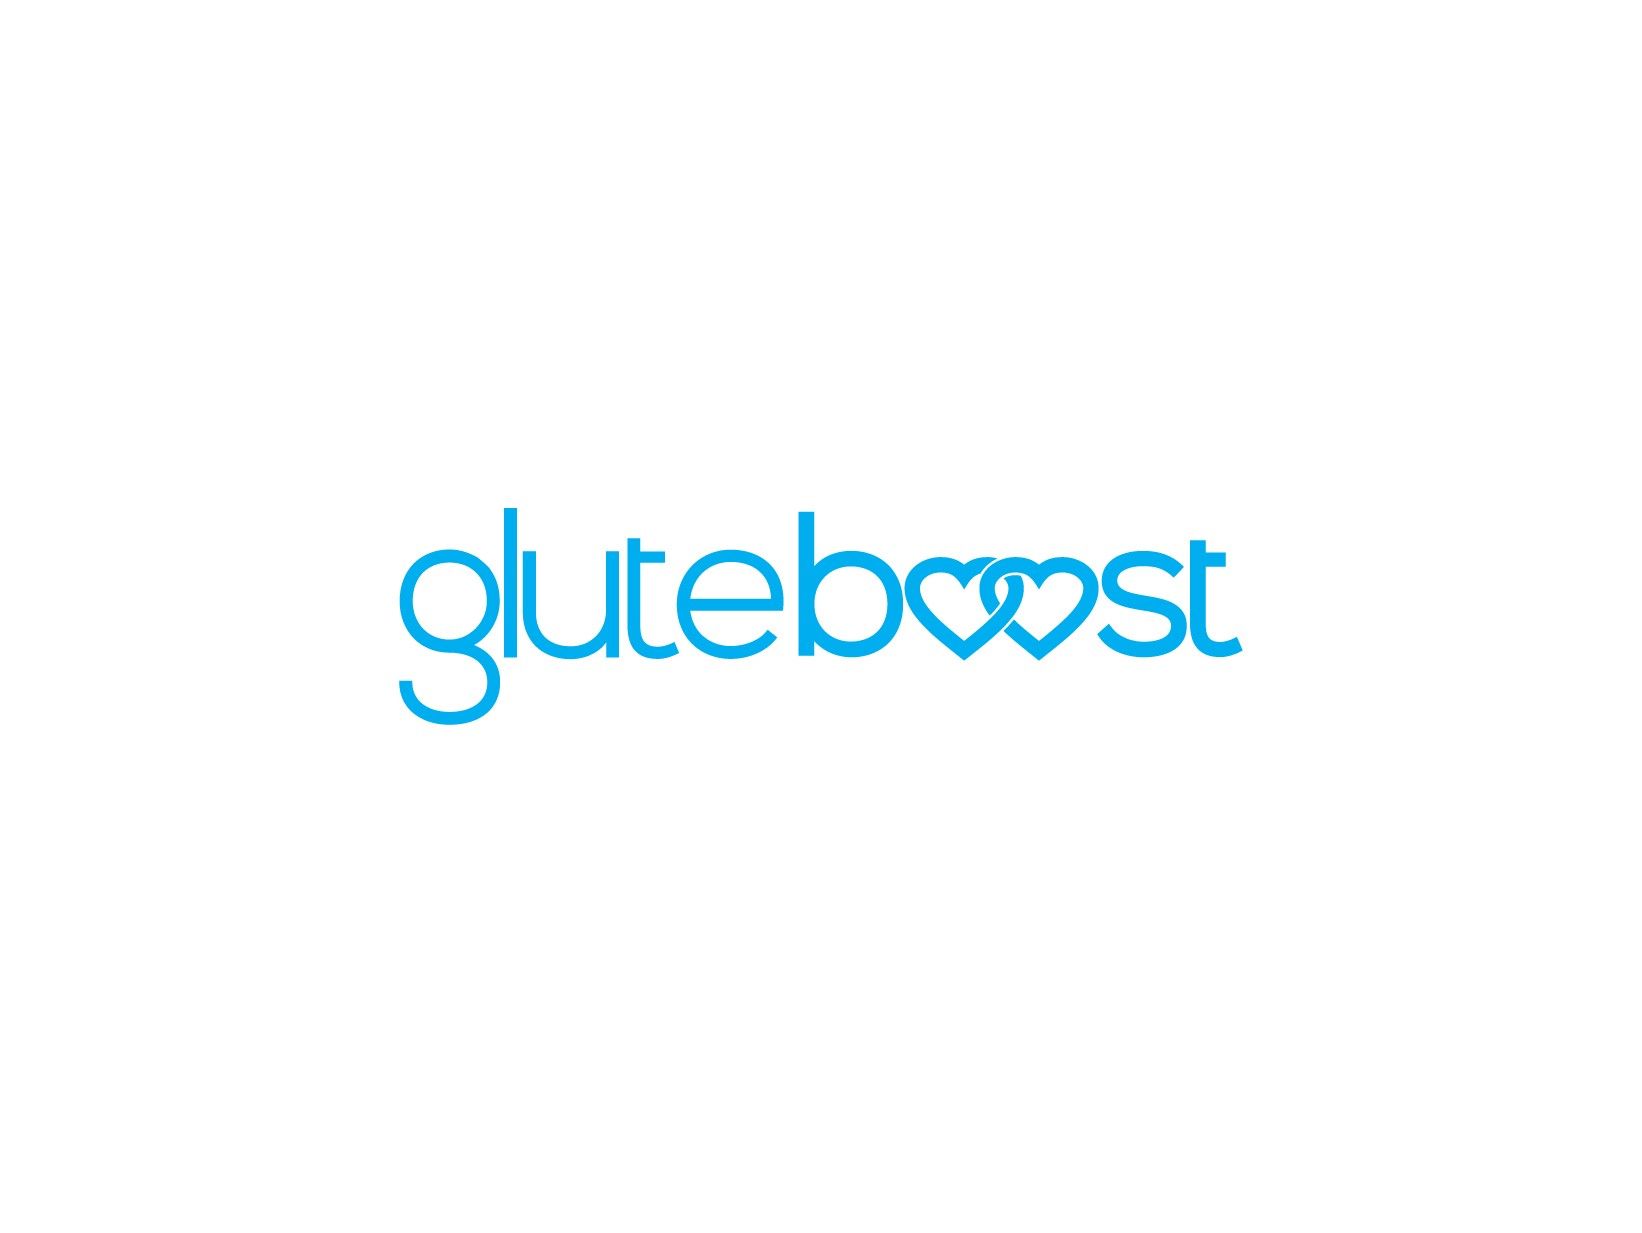 Want to Be More - Gluteboost